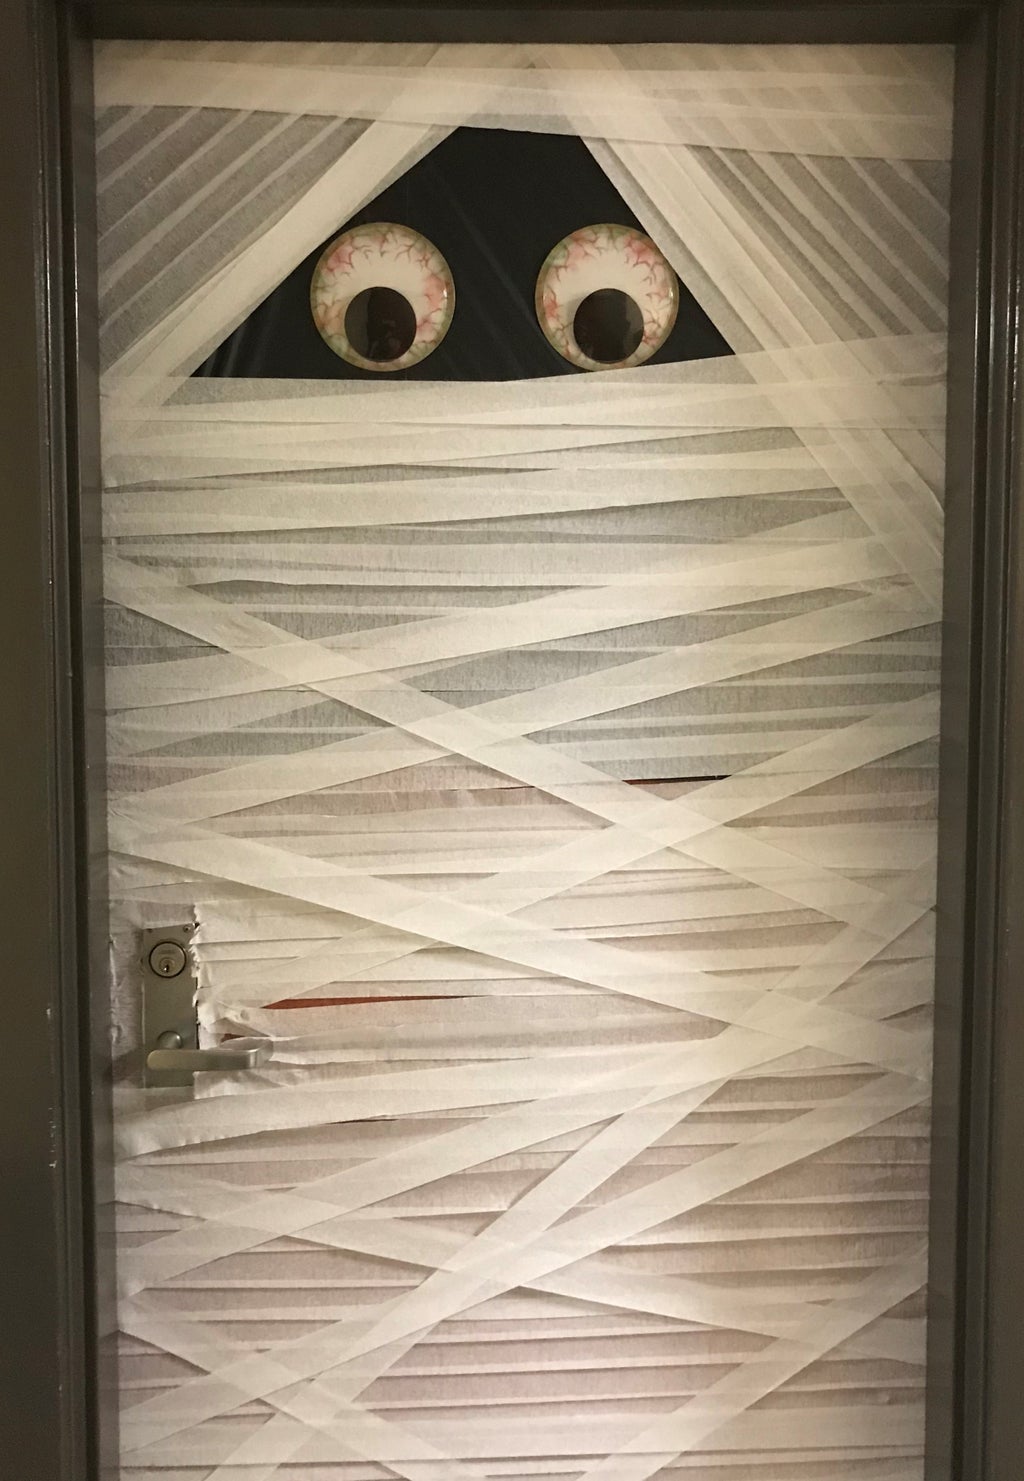 A decorated door with two big eyes made to look like a mummy